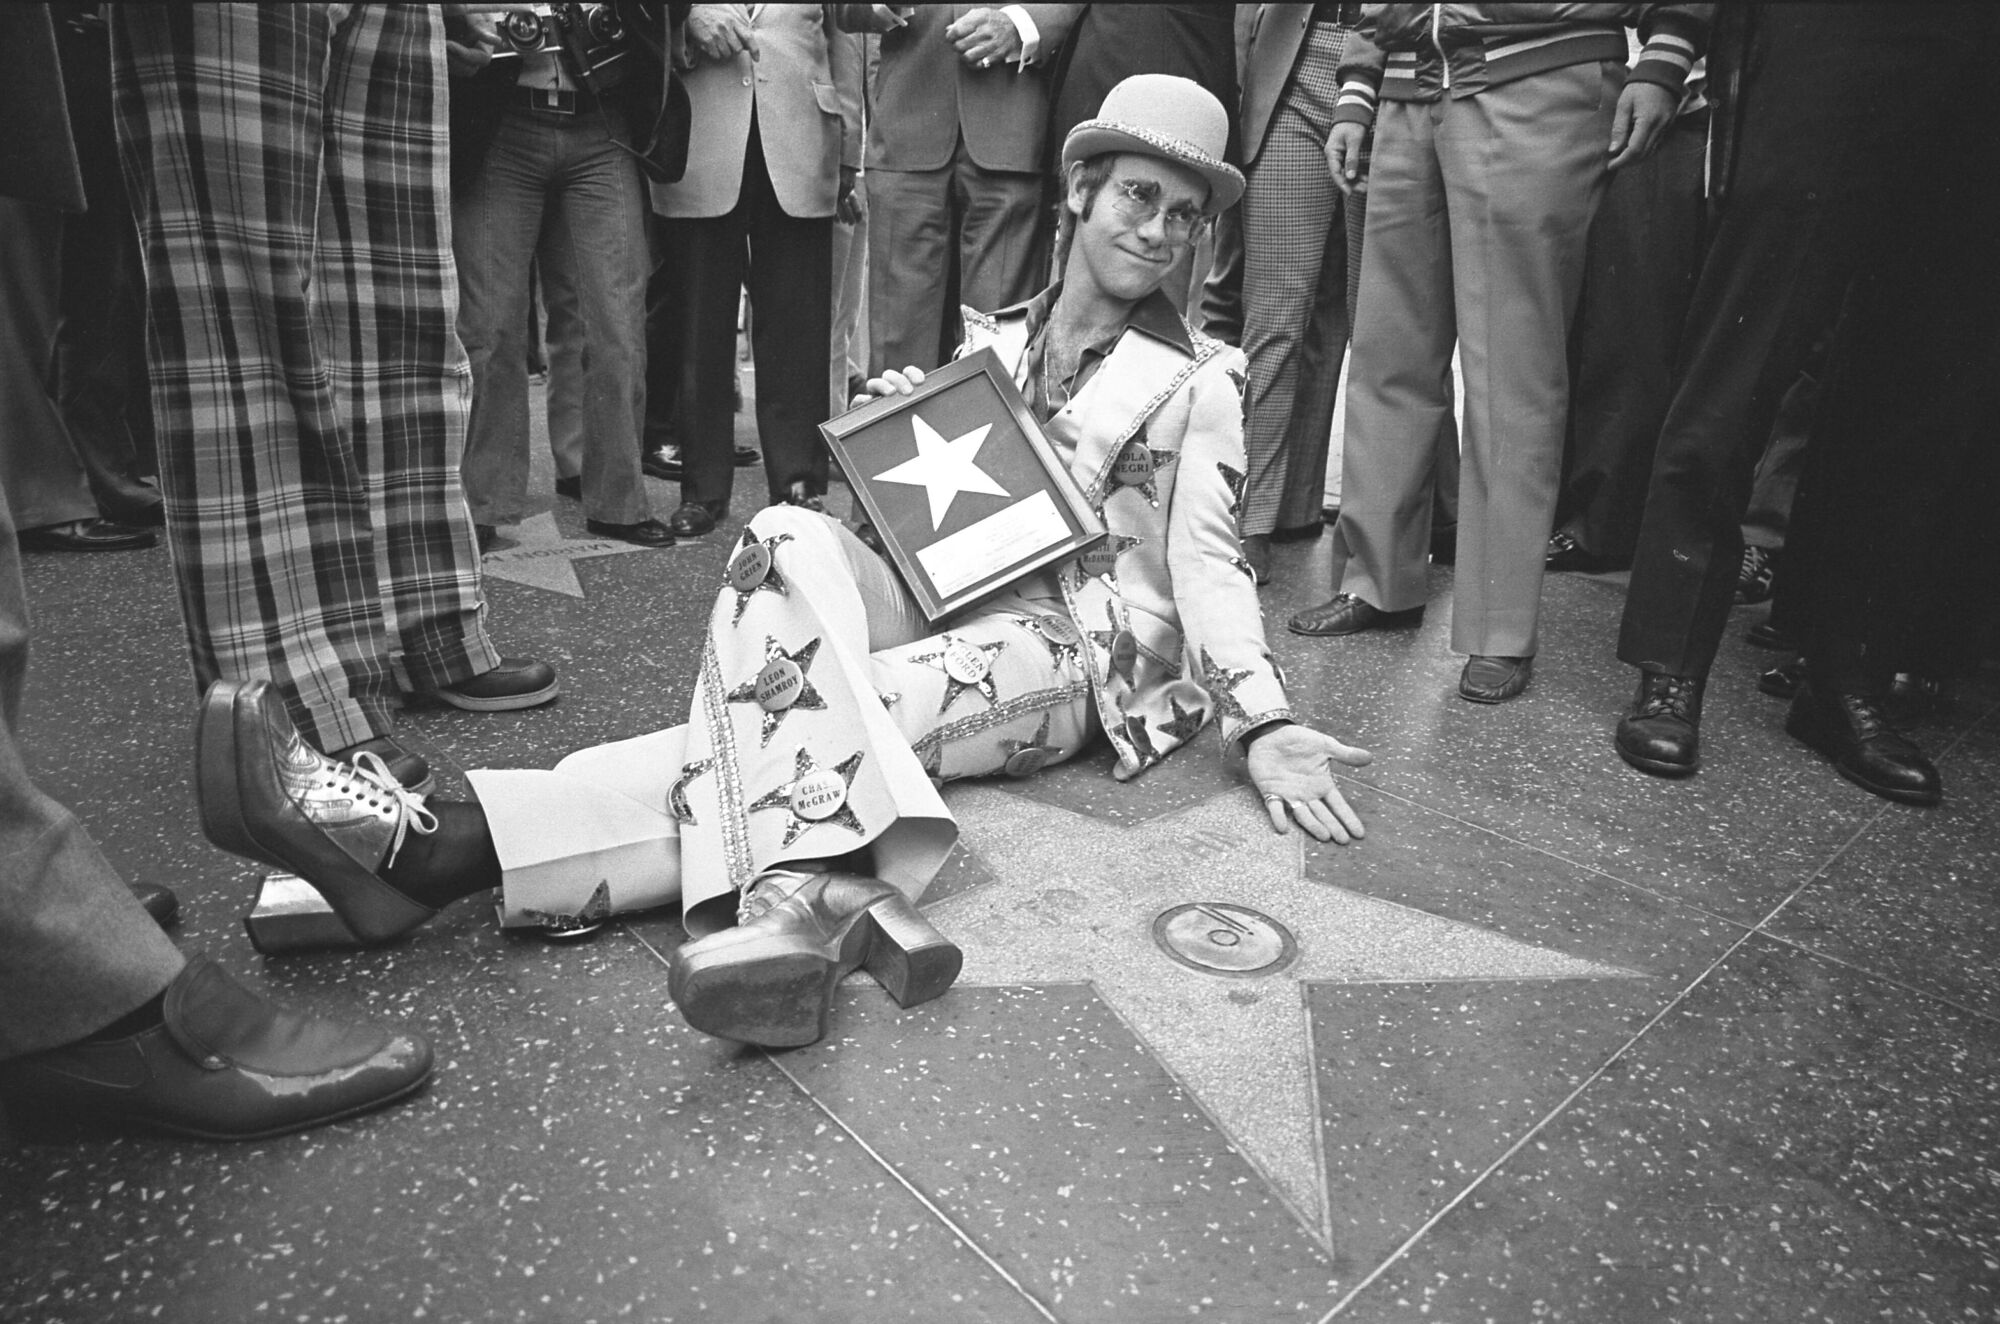 Elton John is shown receiving his star on the Hollywood Walk of Fame in 1975.